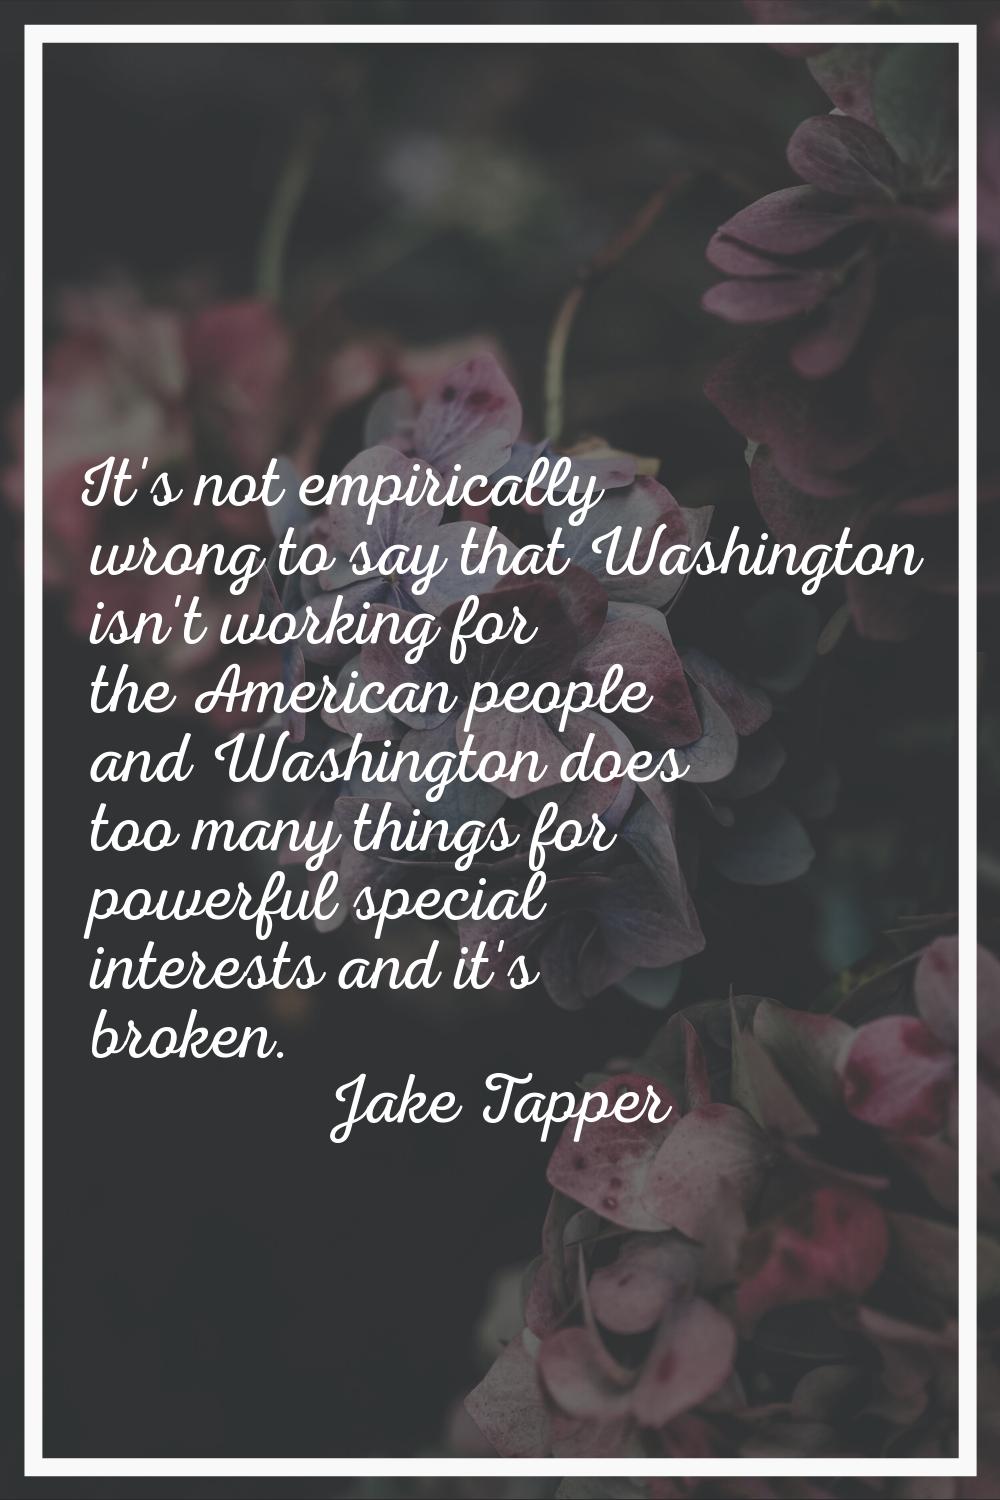 It's not empirically wrong to say that Washington isn't working for the American people and Washing